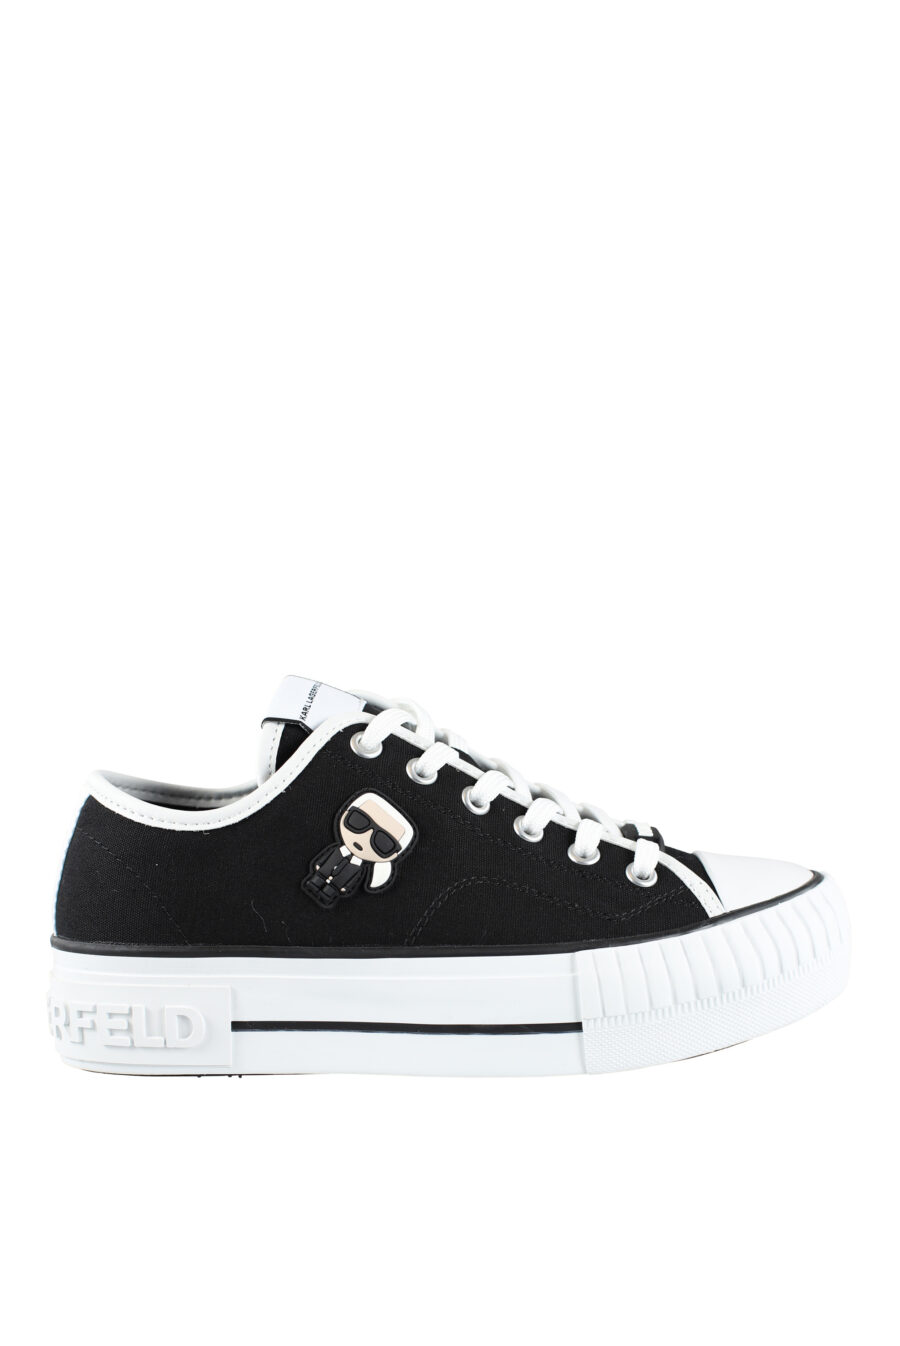 Black converse style trainers with rubber "karl" logo - IMG 9576